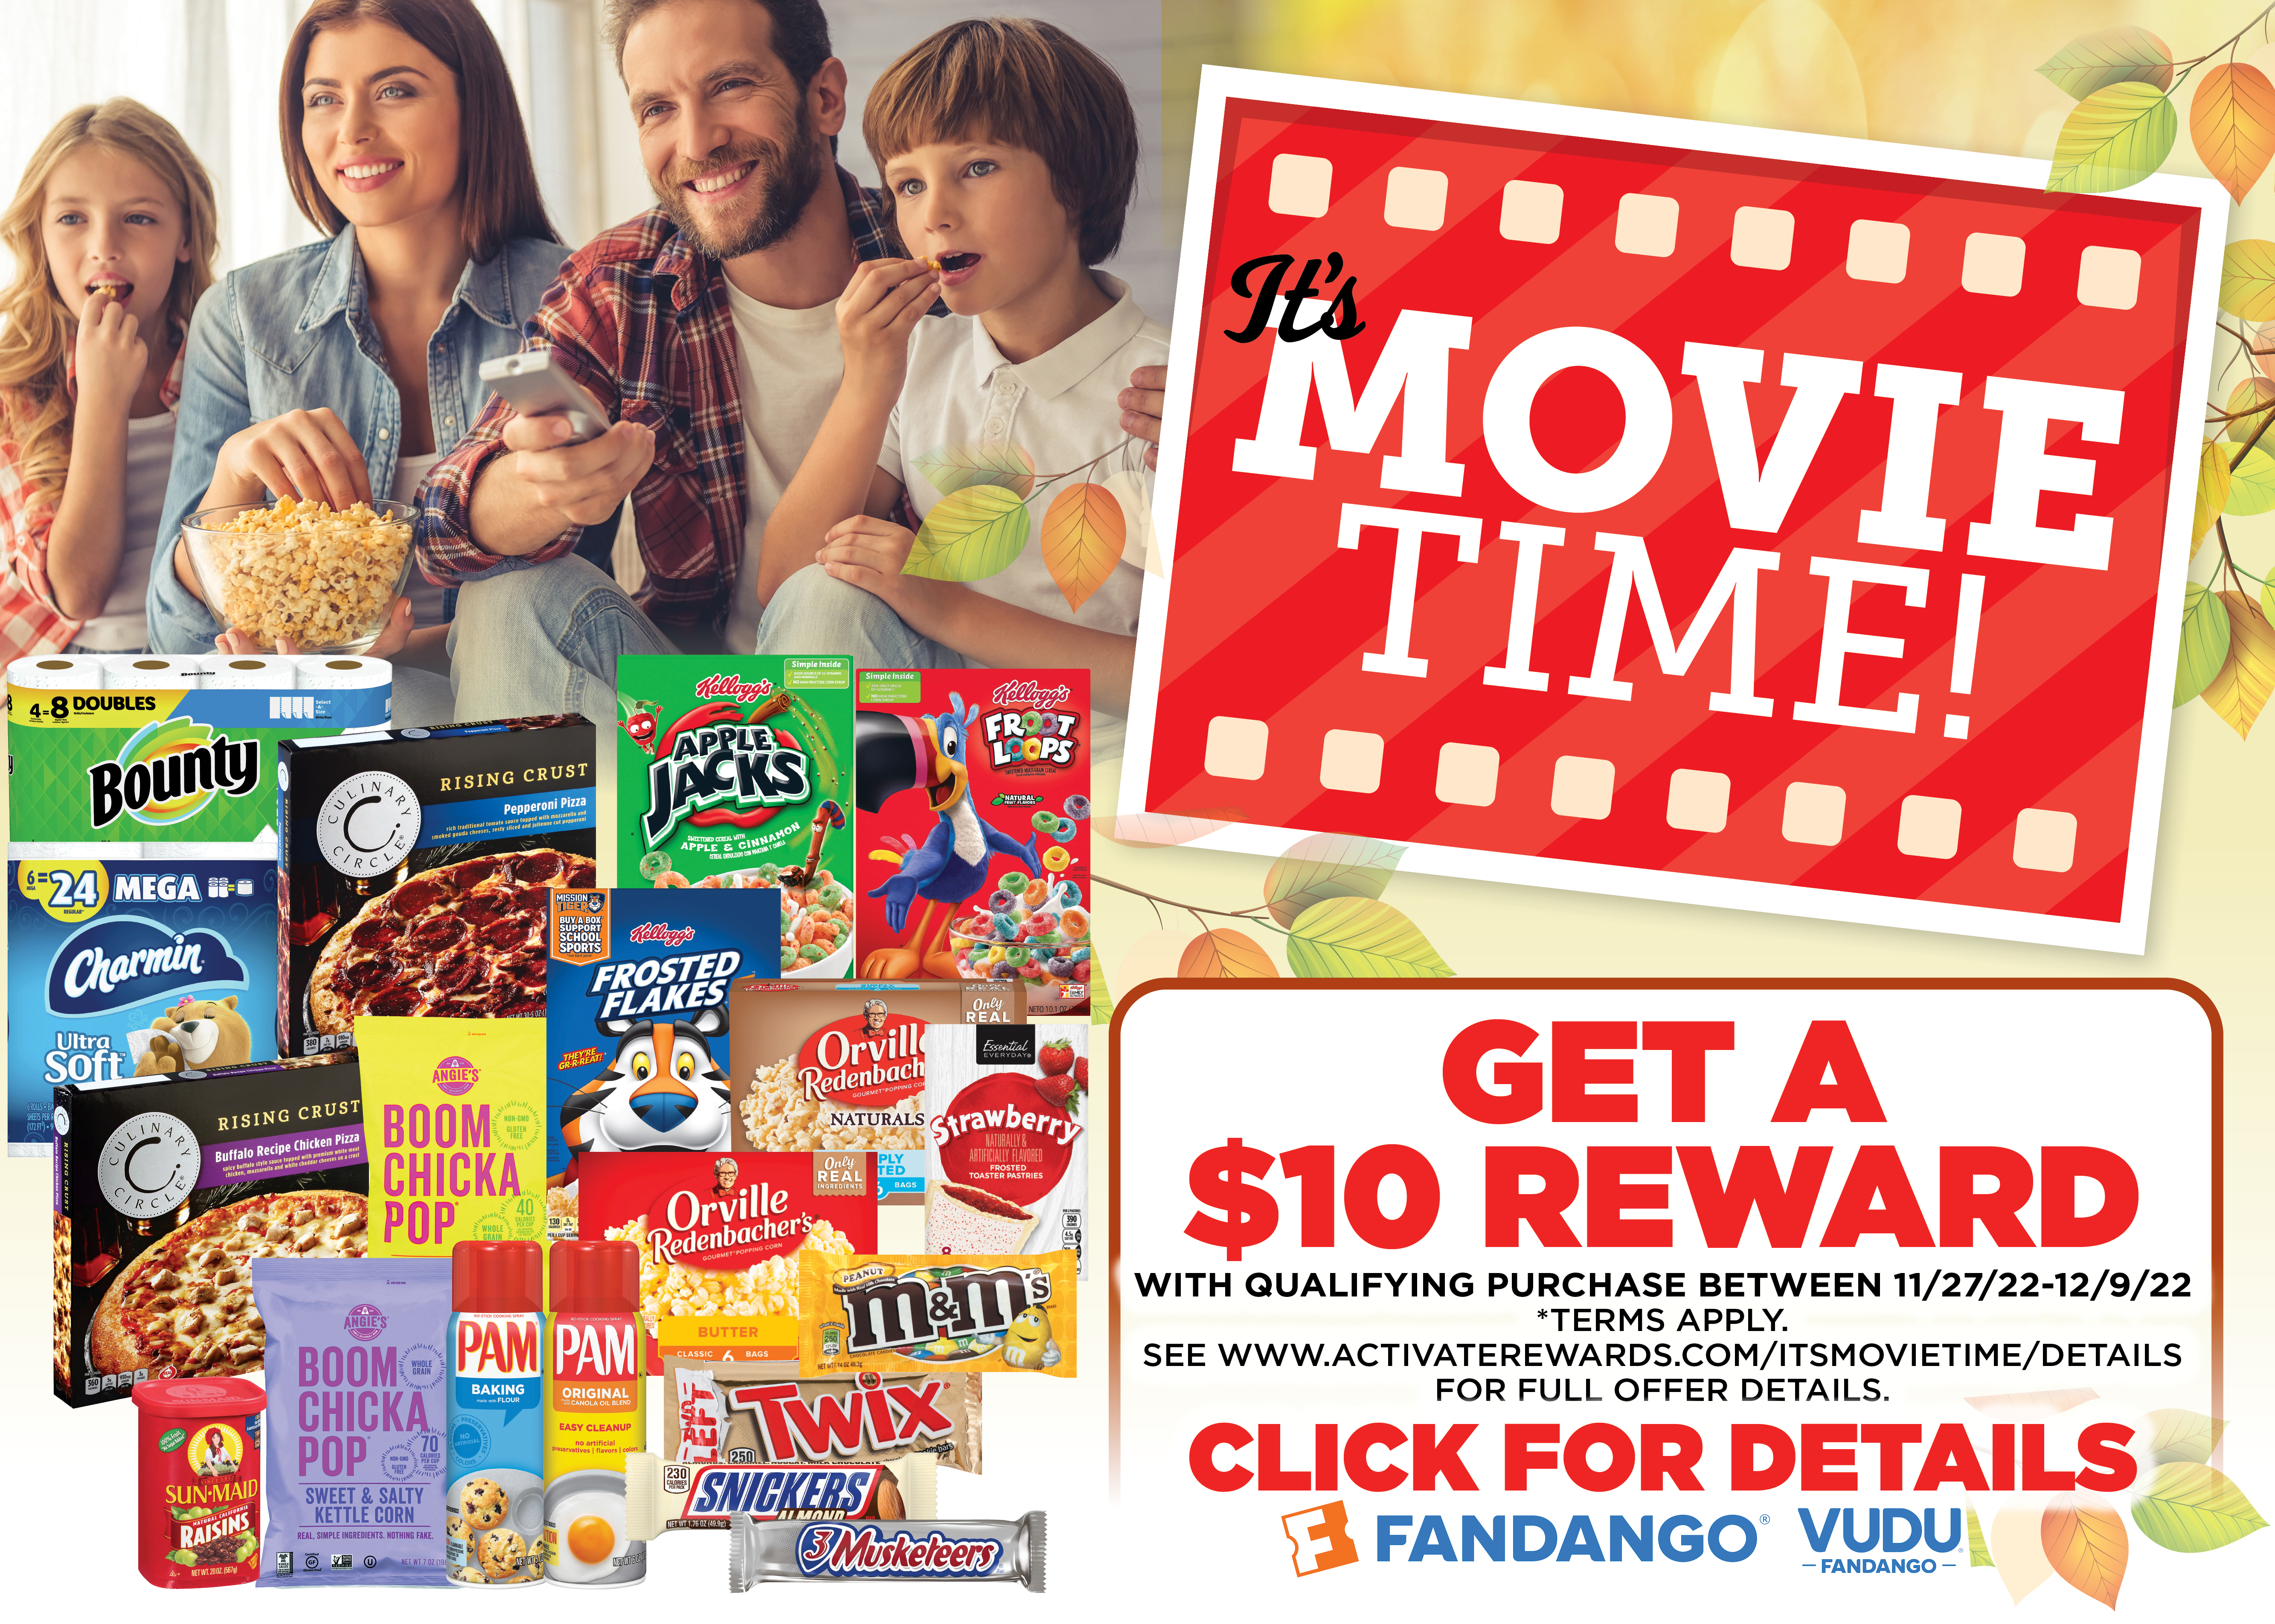 Get a $10 Reward with qualifying purchases between 11/27/22 - 12/9/22 